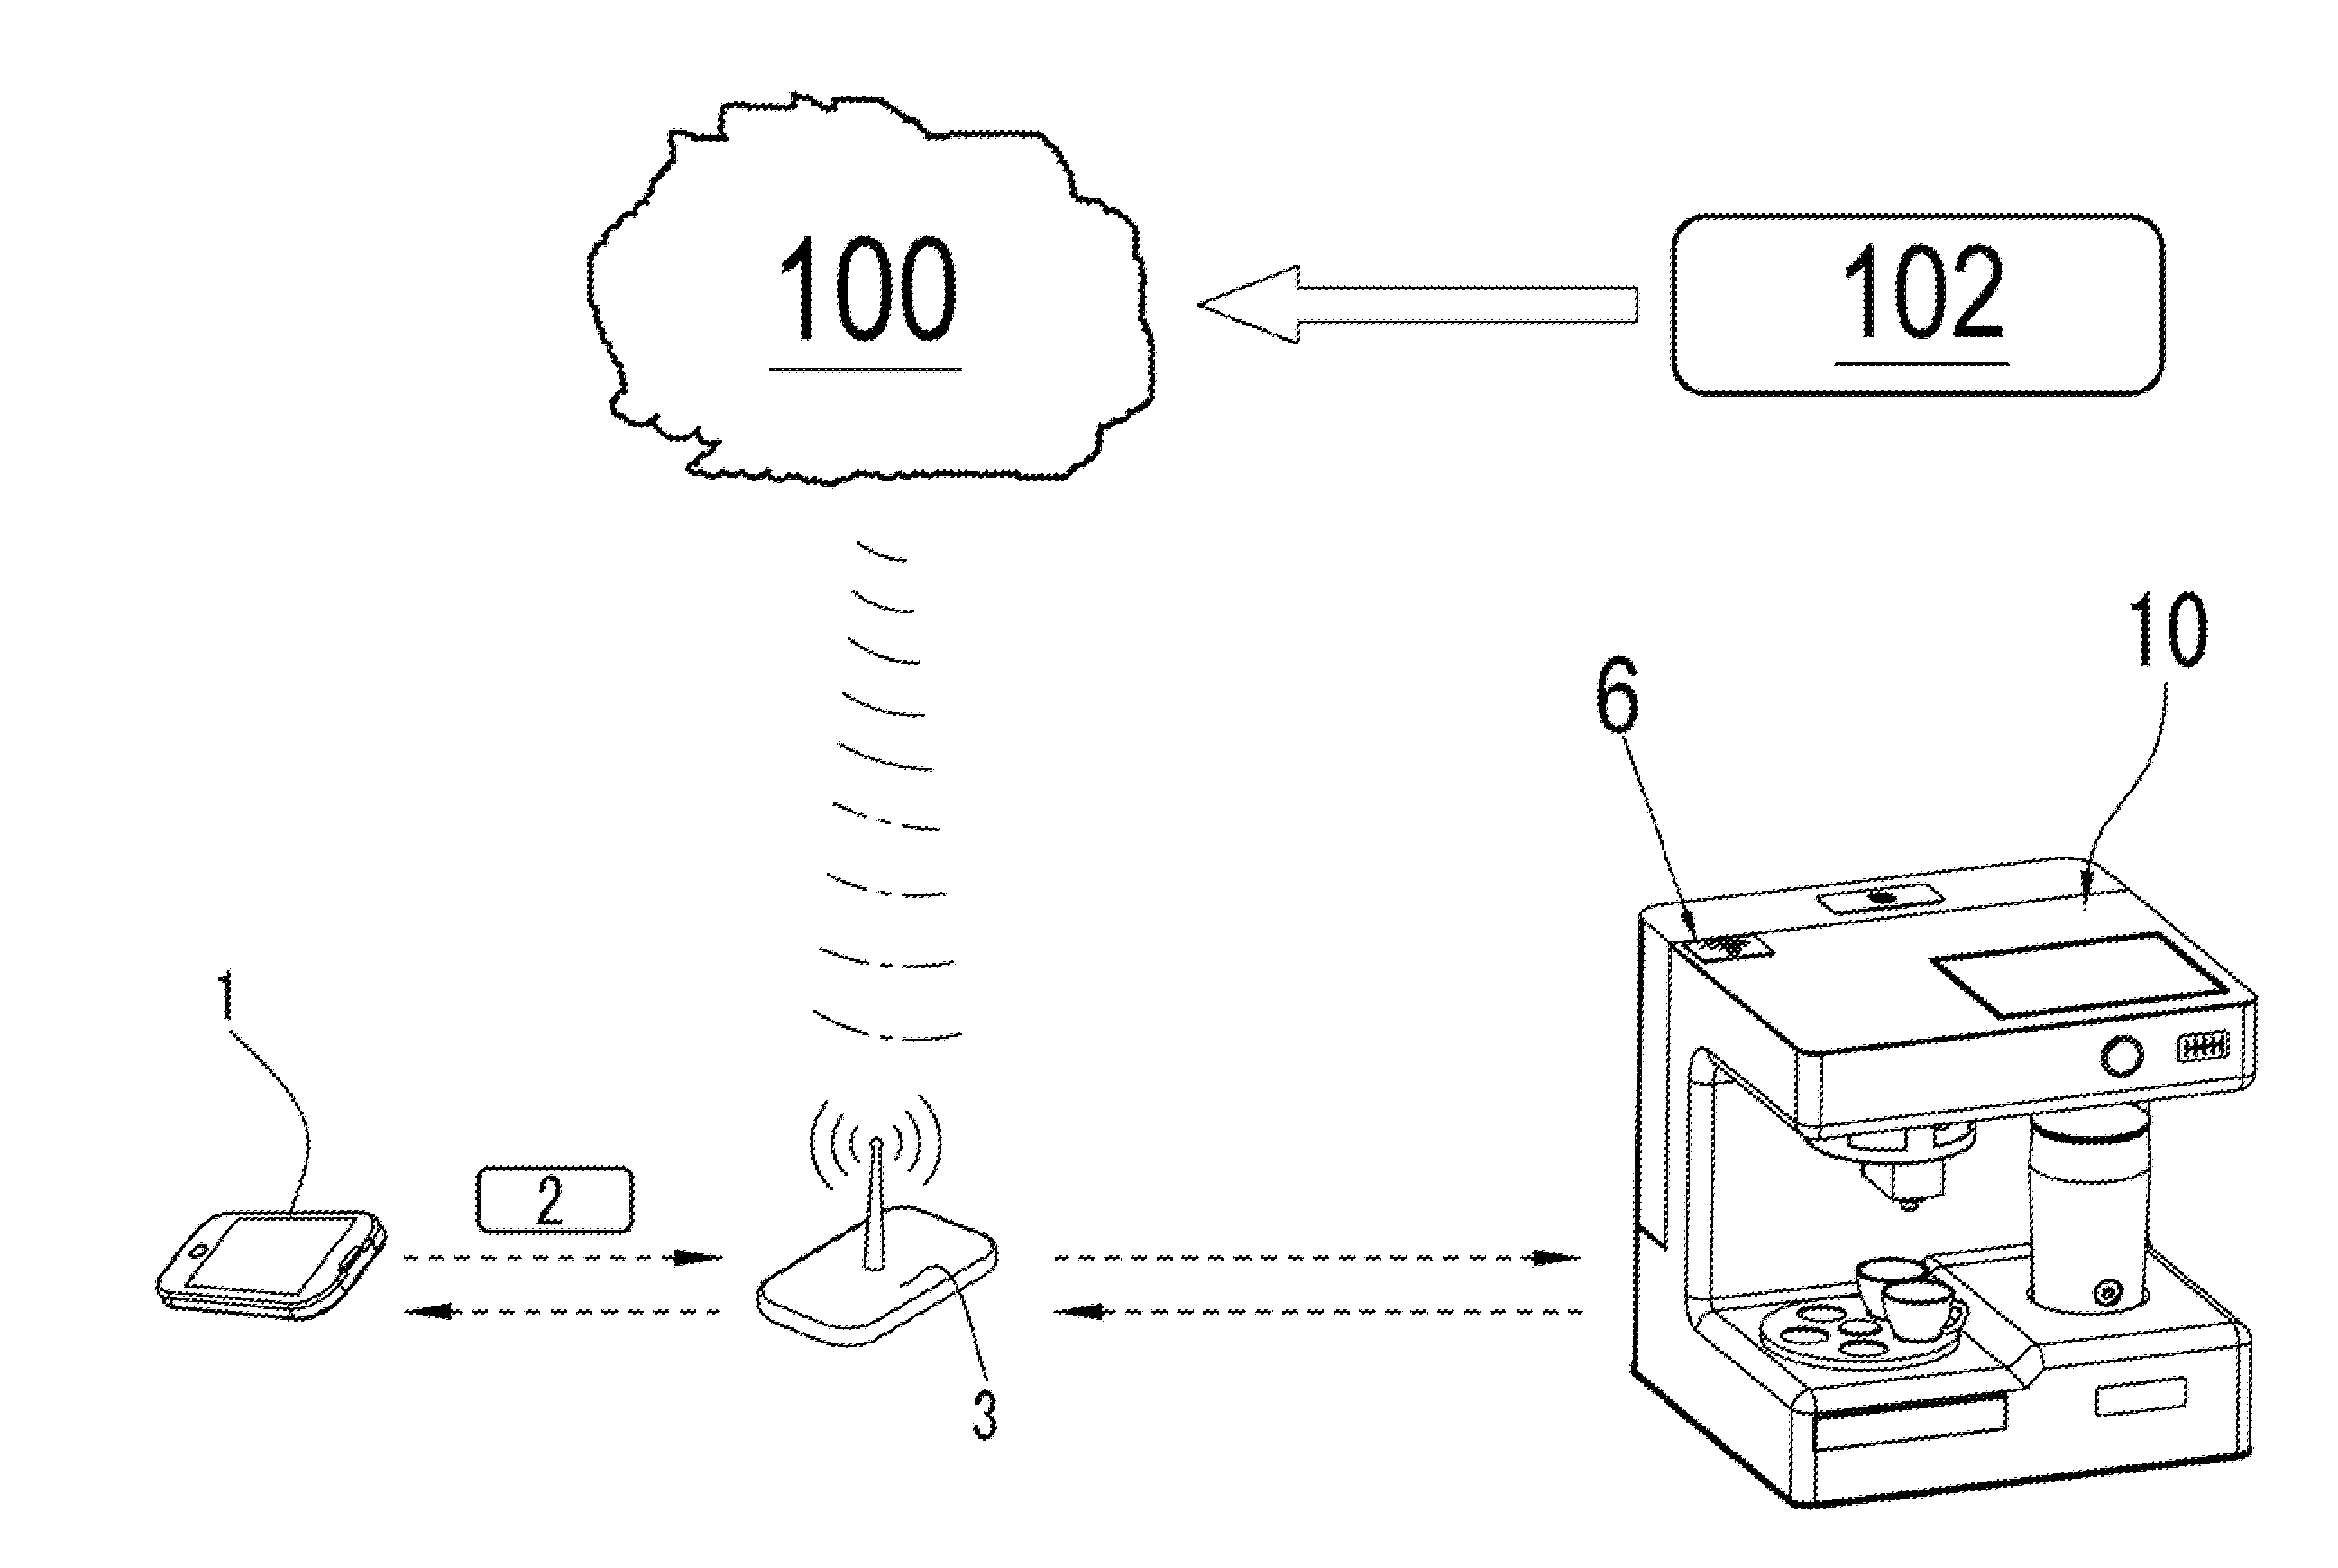 Network connected coffee maker for processing a coffee product